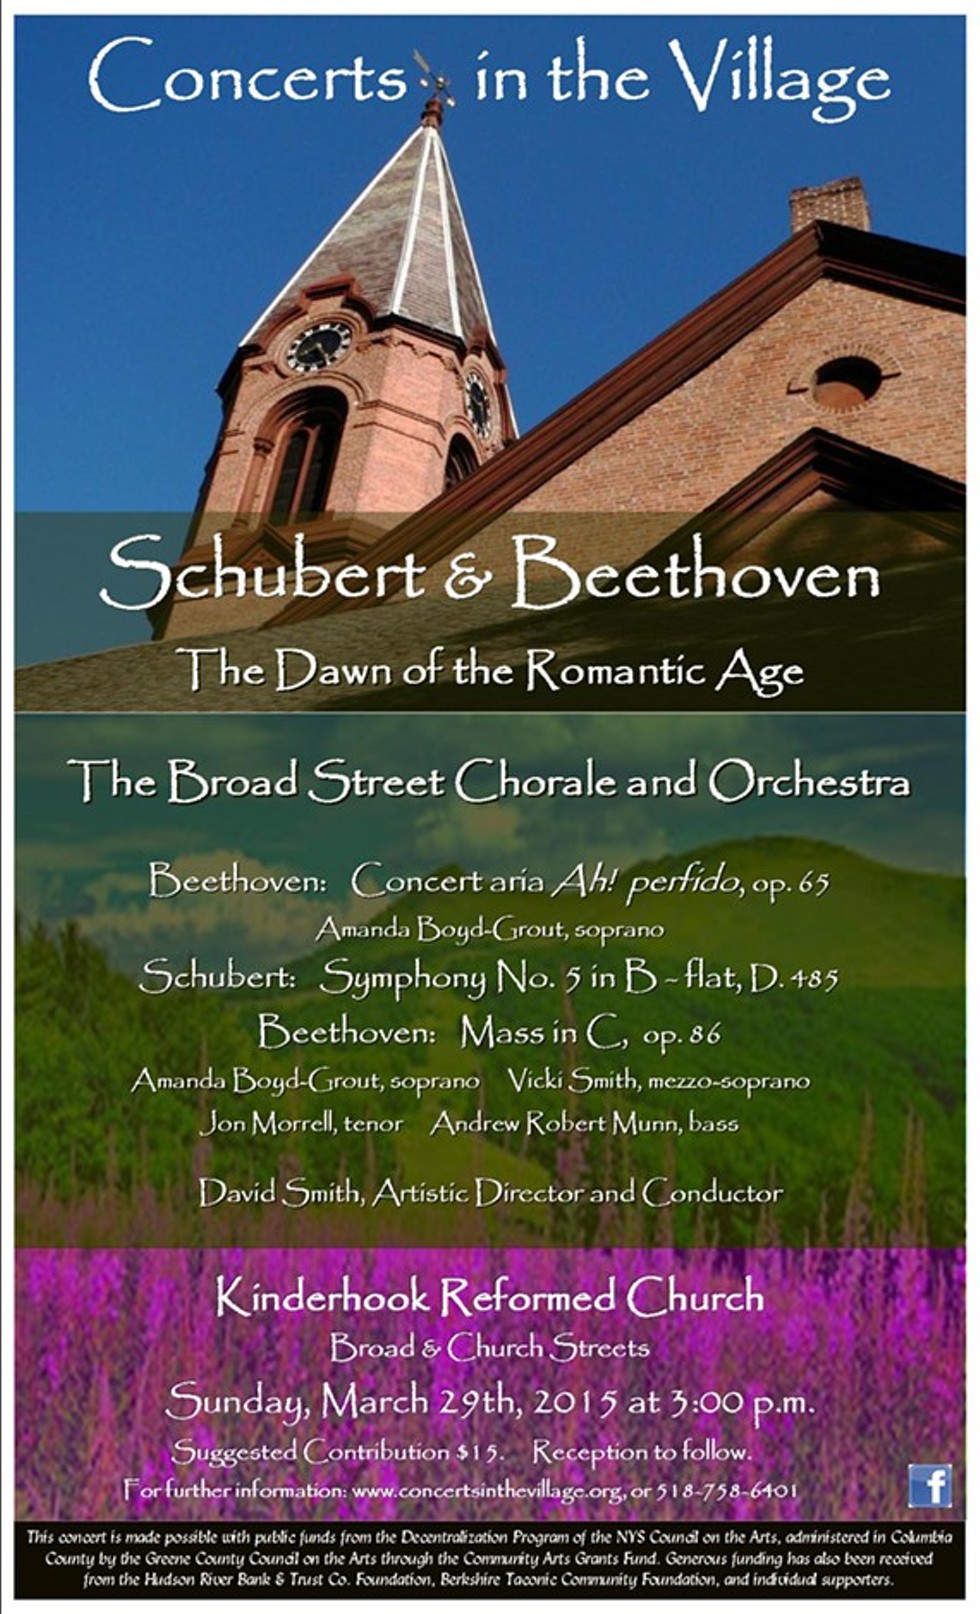 Concerts in the Village, Kinderhook: Schubert and Beethoven on March 29th